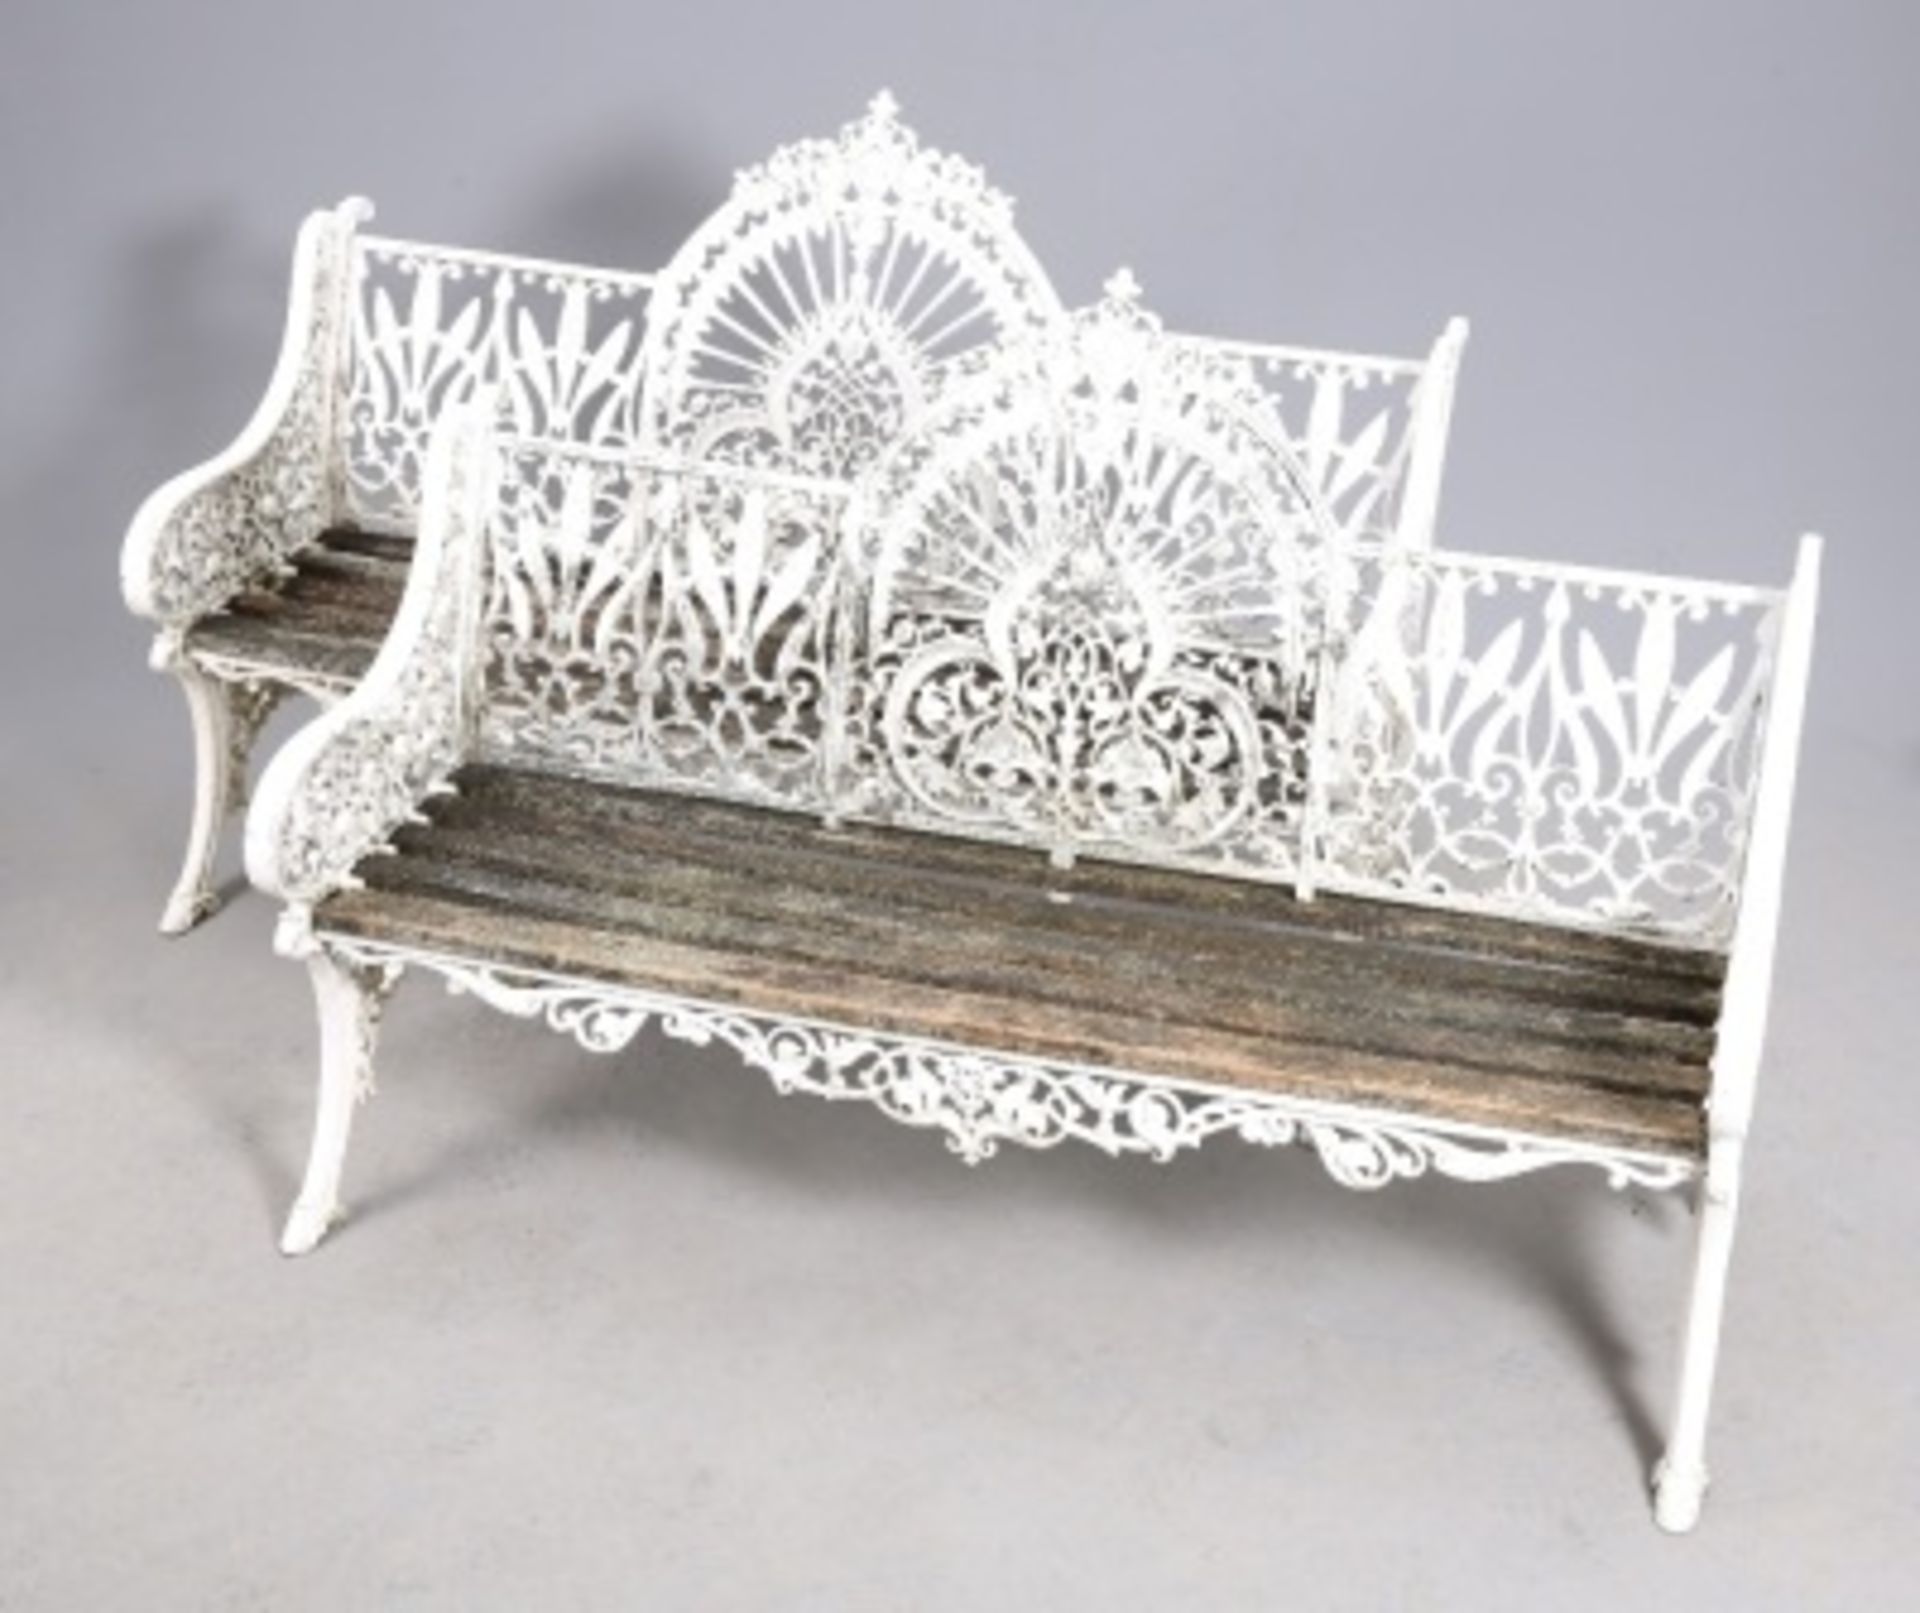 A PAIR OF PAINTED METAL GARDEN BENCHES, IN COALBROOKDALE STYLE. 152cm long